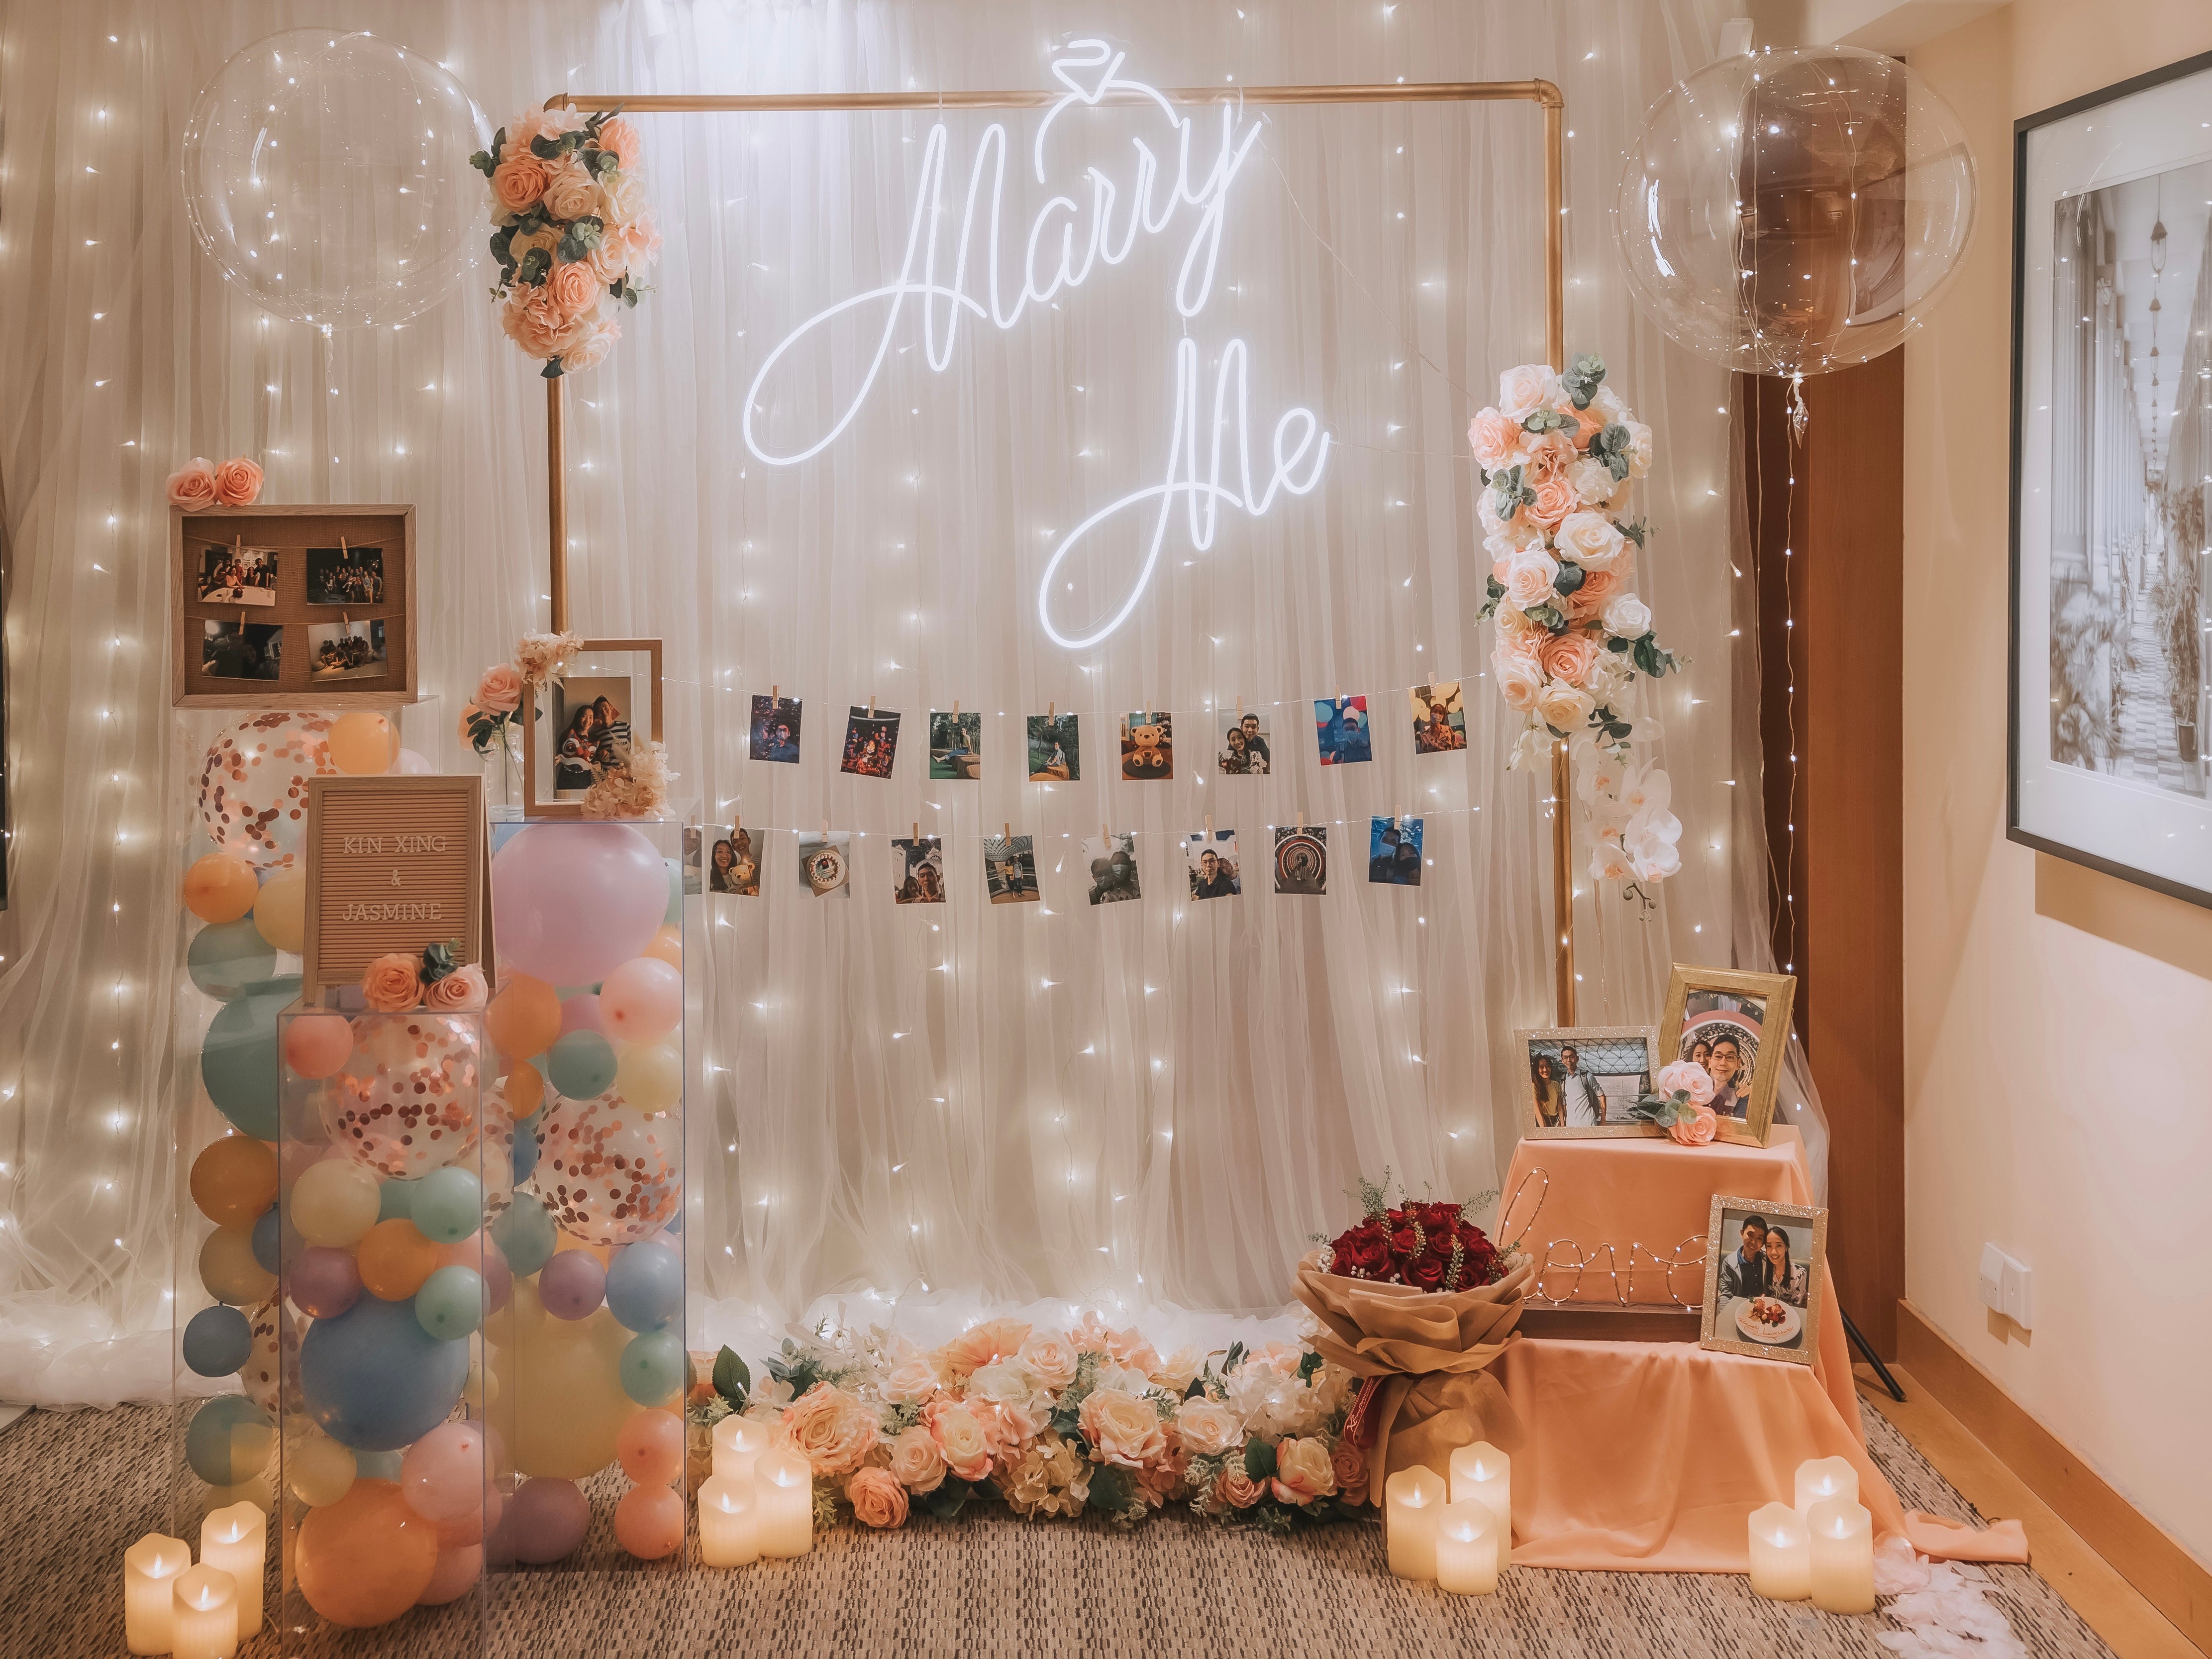 Romantic Hotel Room Proposal Decor in Grand Hyatt Singapore with Fairylight Backdrop, Pastel Balloons, Flowers and Neon Sign by Style It Simply